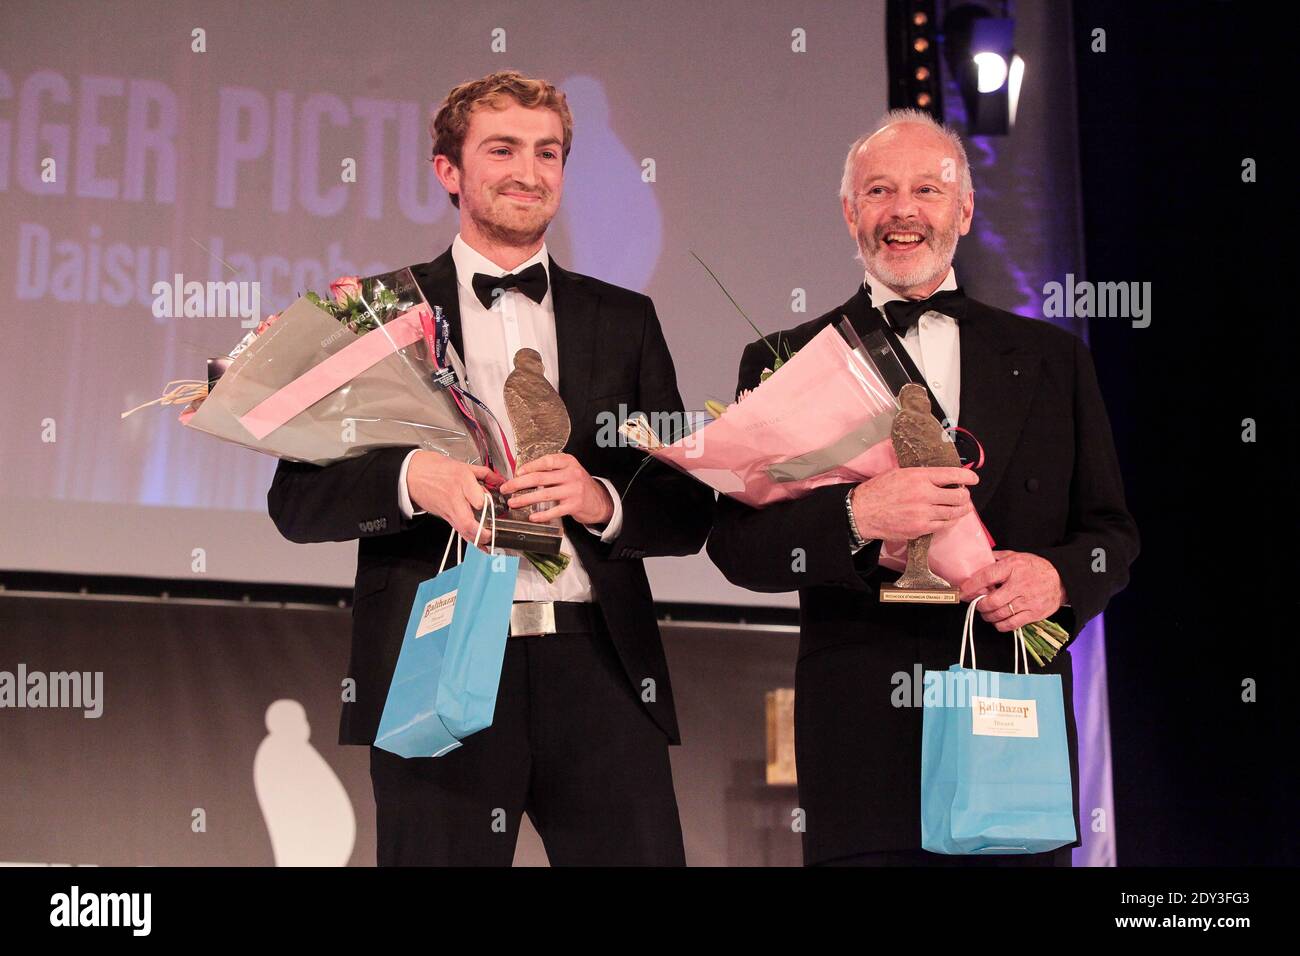 The Movie 'The Bigger Picture' receive the best short Film Award and Michael Radford receives 'Hitchcock d'honneur' during the closing ceremony of the 25th British Film Festival of Dinard, held at Palais des Arts in Dinard, France, on October 11, 2014. Photo by Audrey Poree/ABACAPRESS.COM Stock Photo